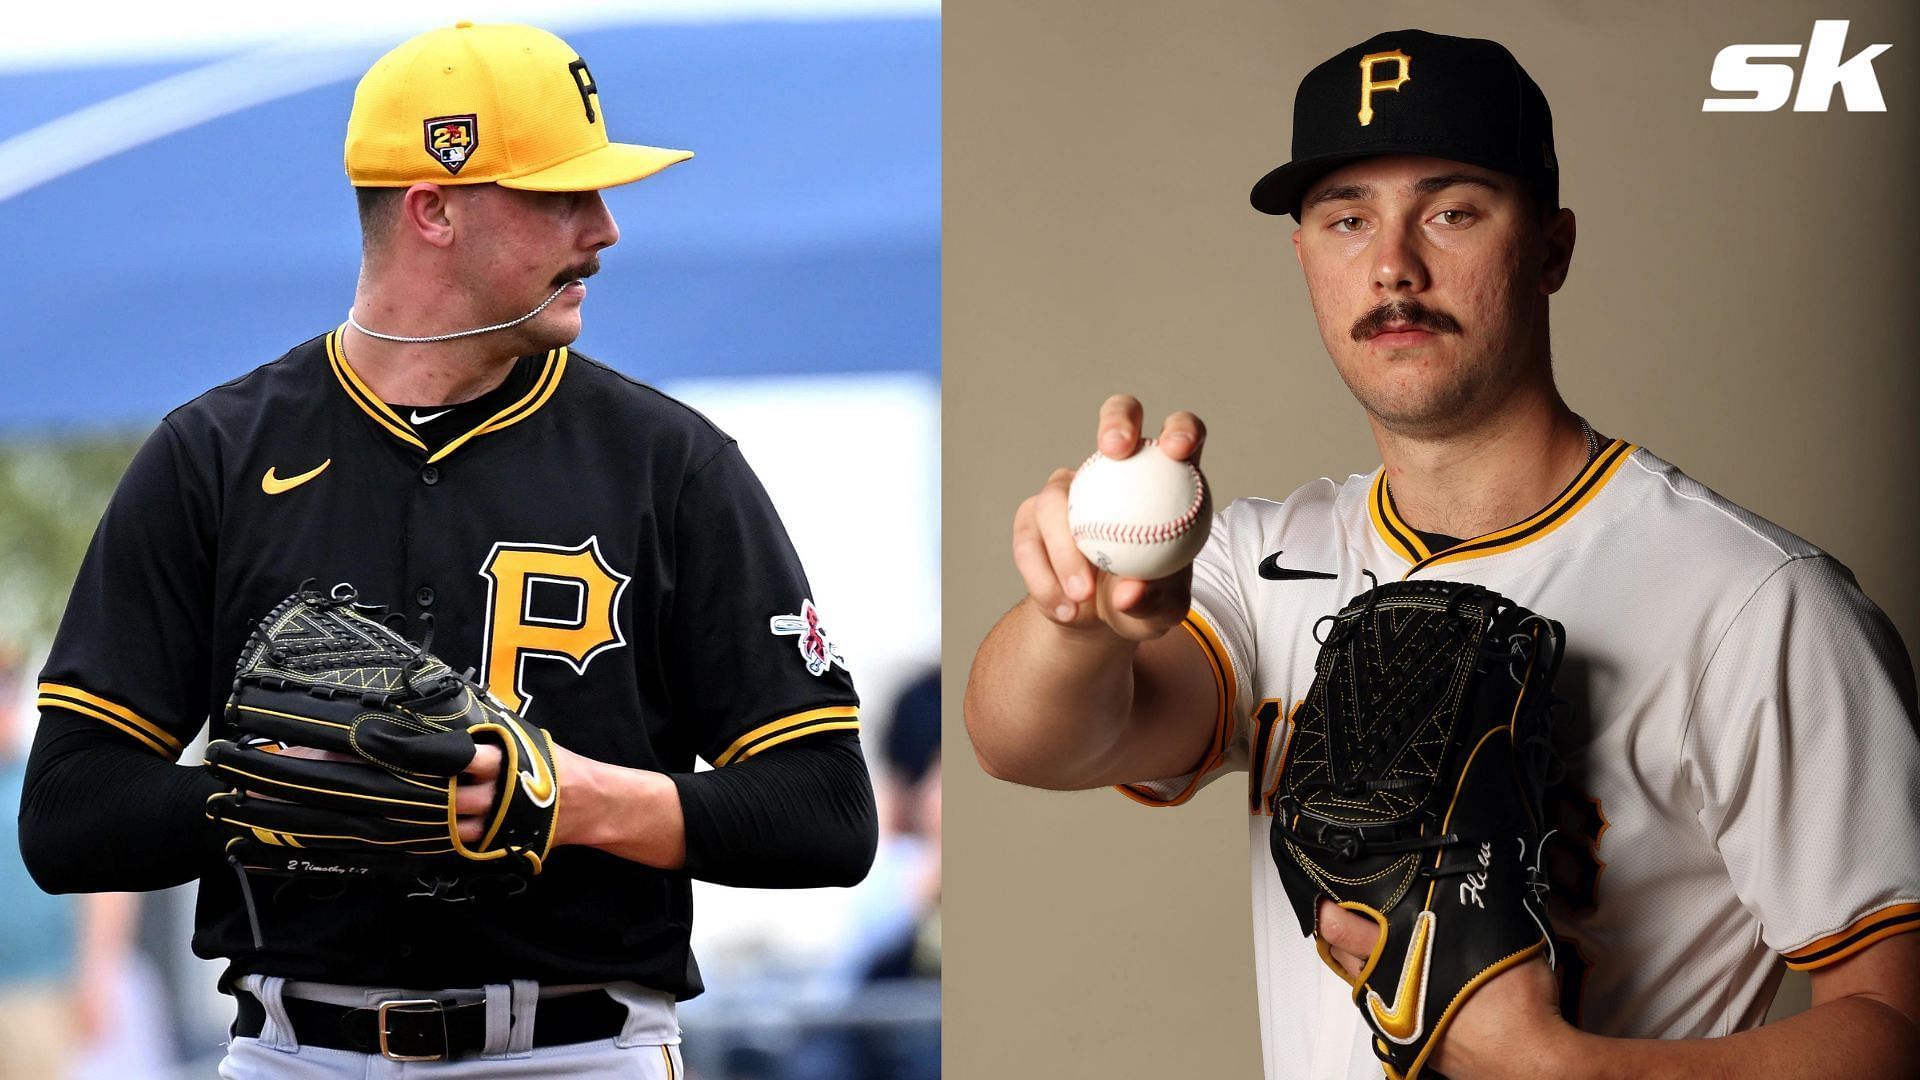 The Pittsburgh Pirates top prospect Paul Skenes is slated to make his MLB debut against the Cubs